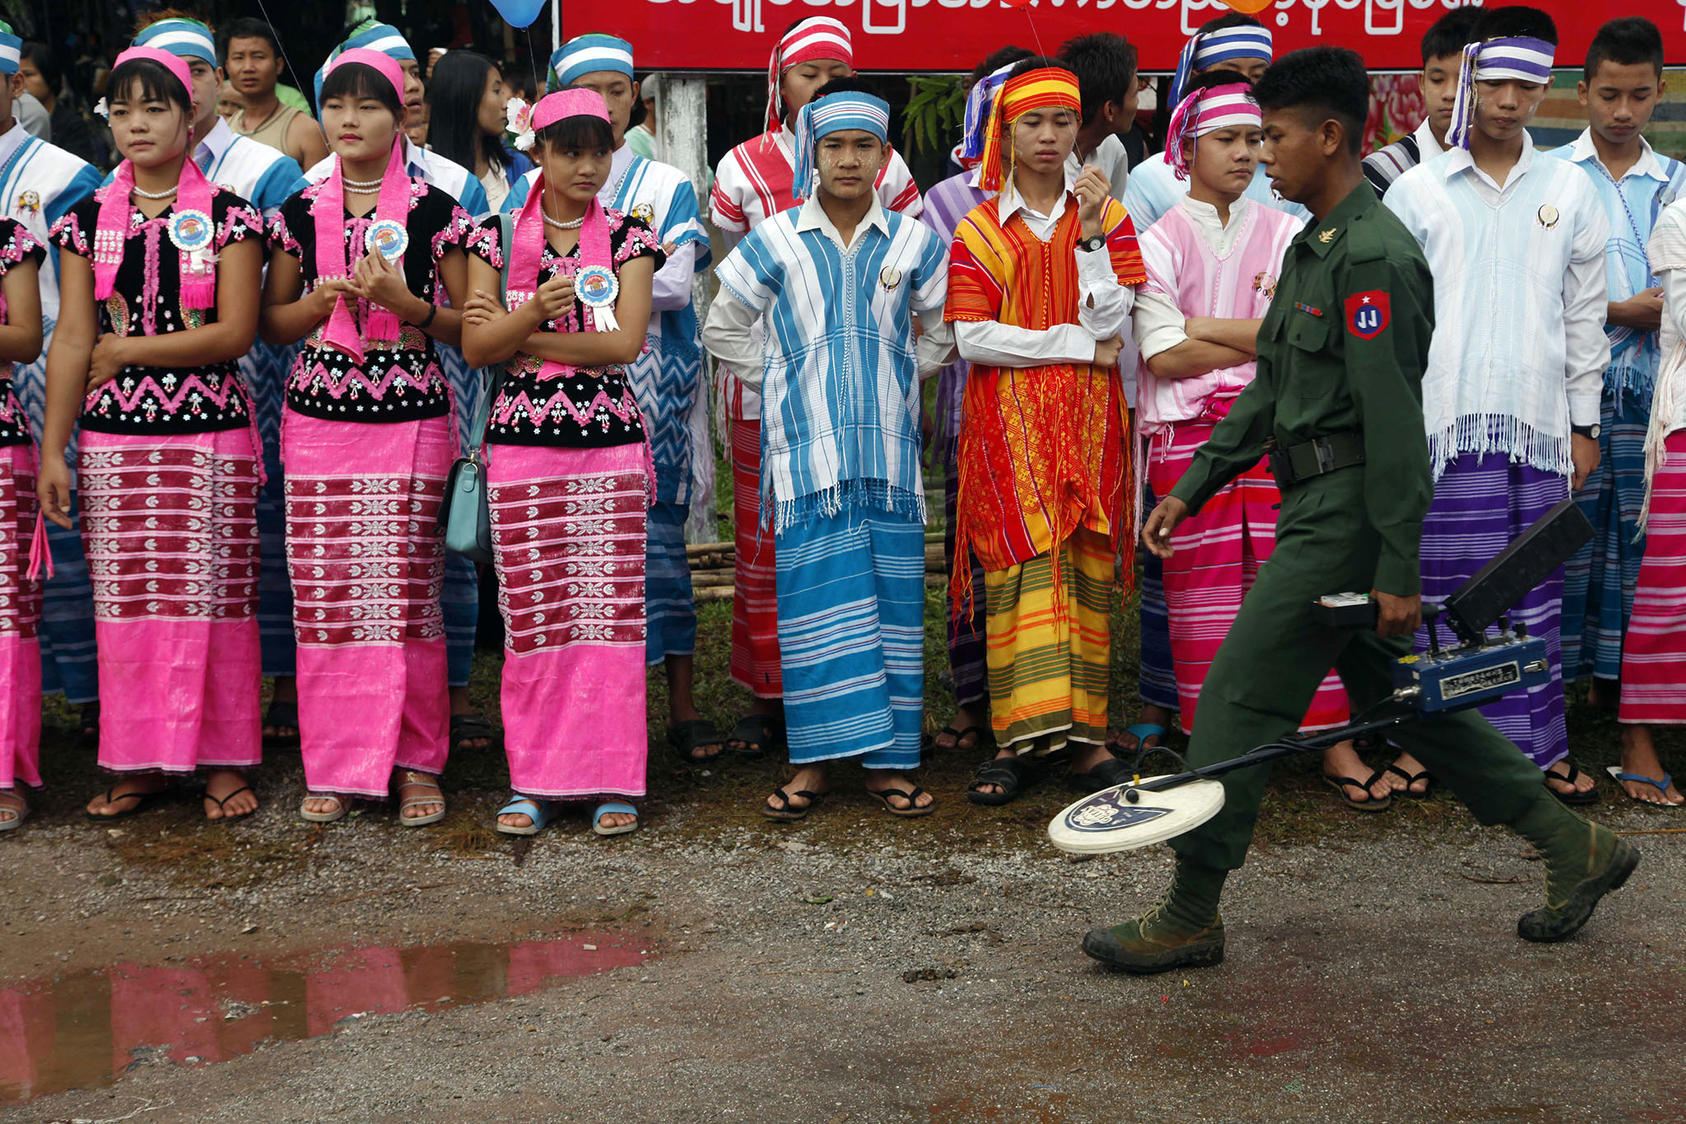 A soldier from the Myanmar army provides security as ethnic Karens attend a ceremony to mark Karen State Day in Hpa-an, Karen State, on November 7, 2014. (Photo by Khin Maung Win/AP)